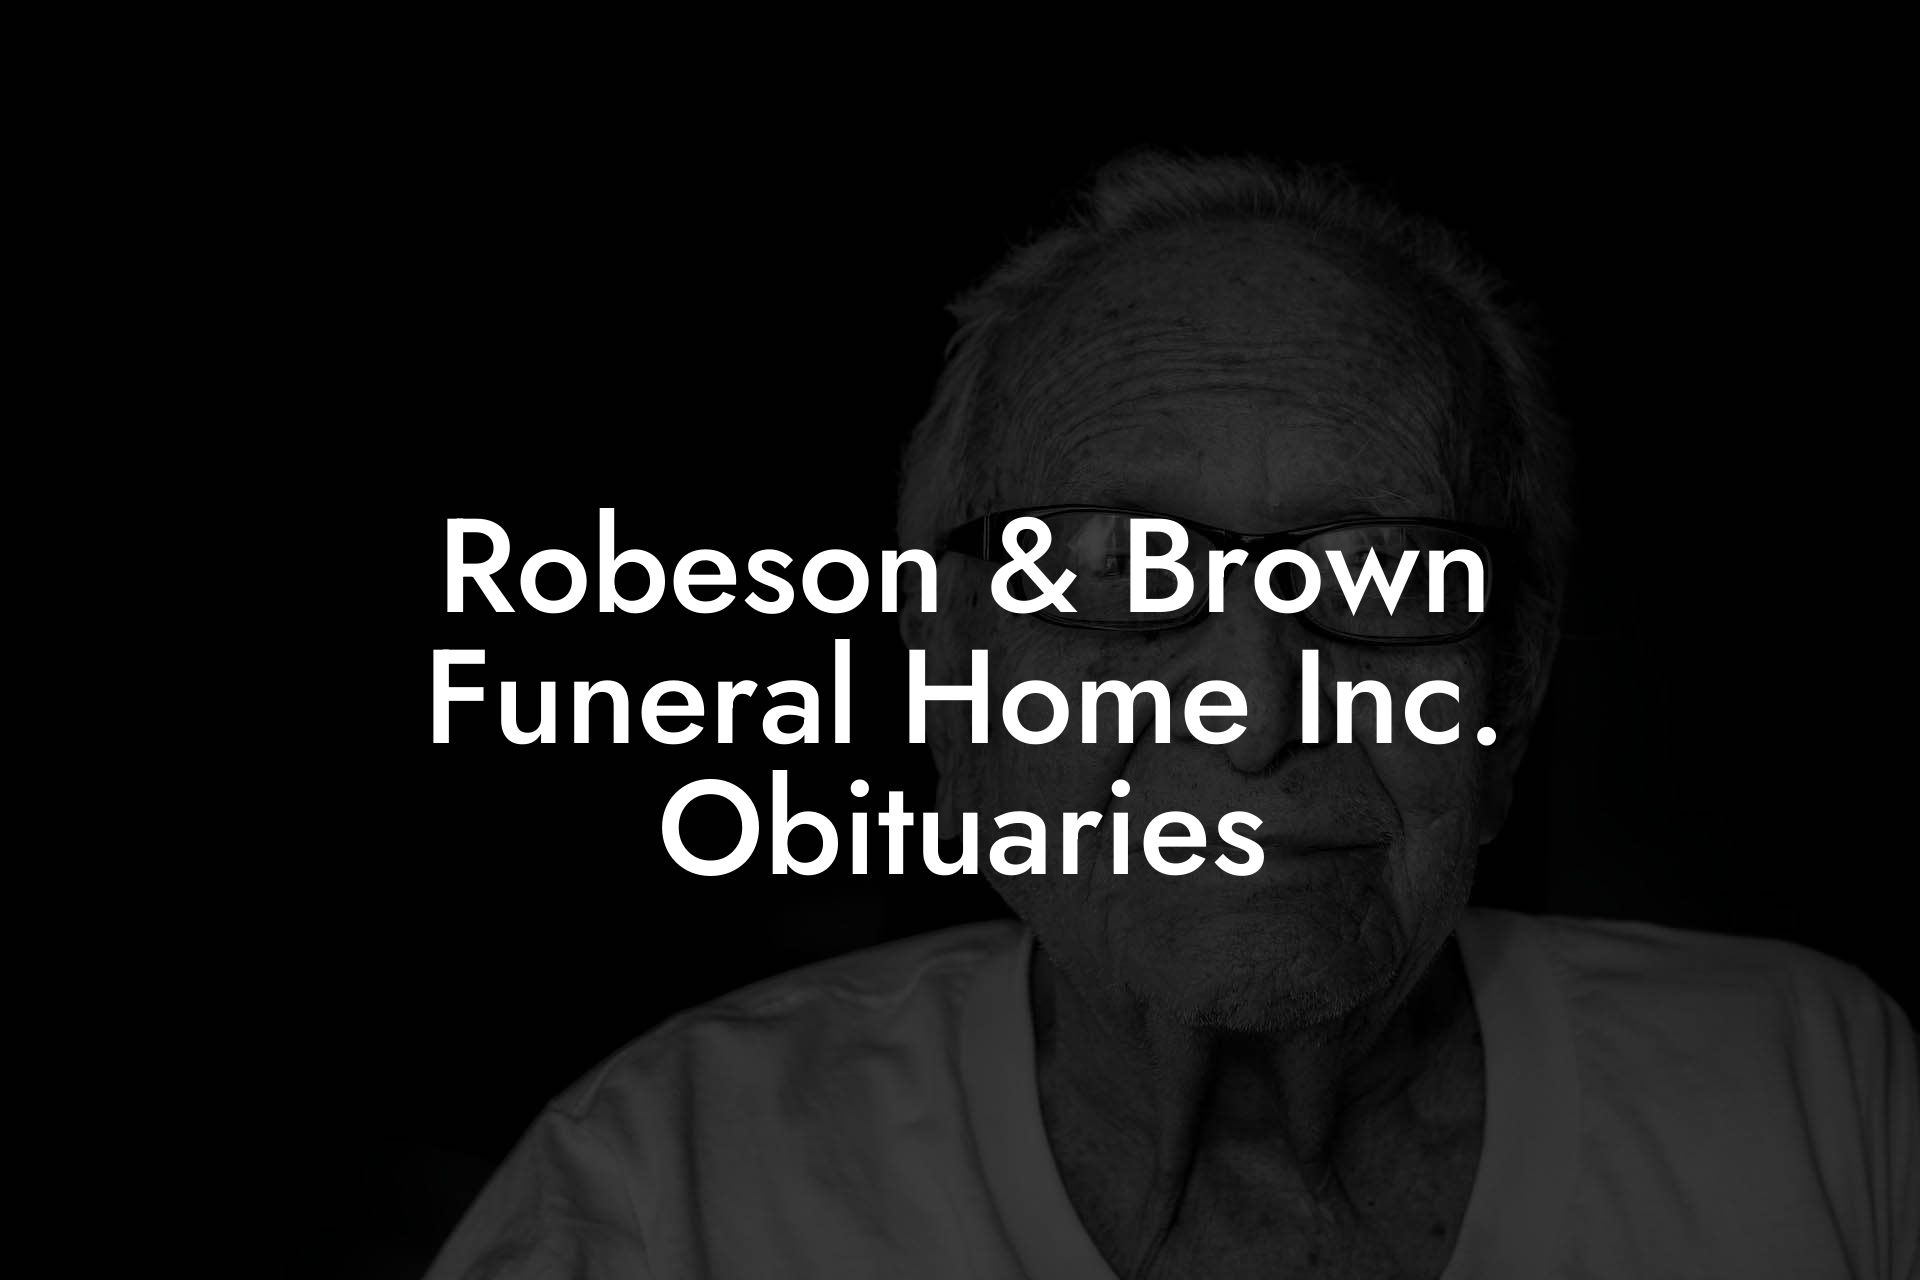 Robeson & Brown Funeral Home Inc. Obituaries